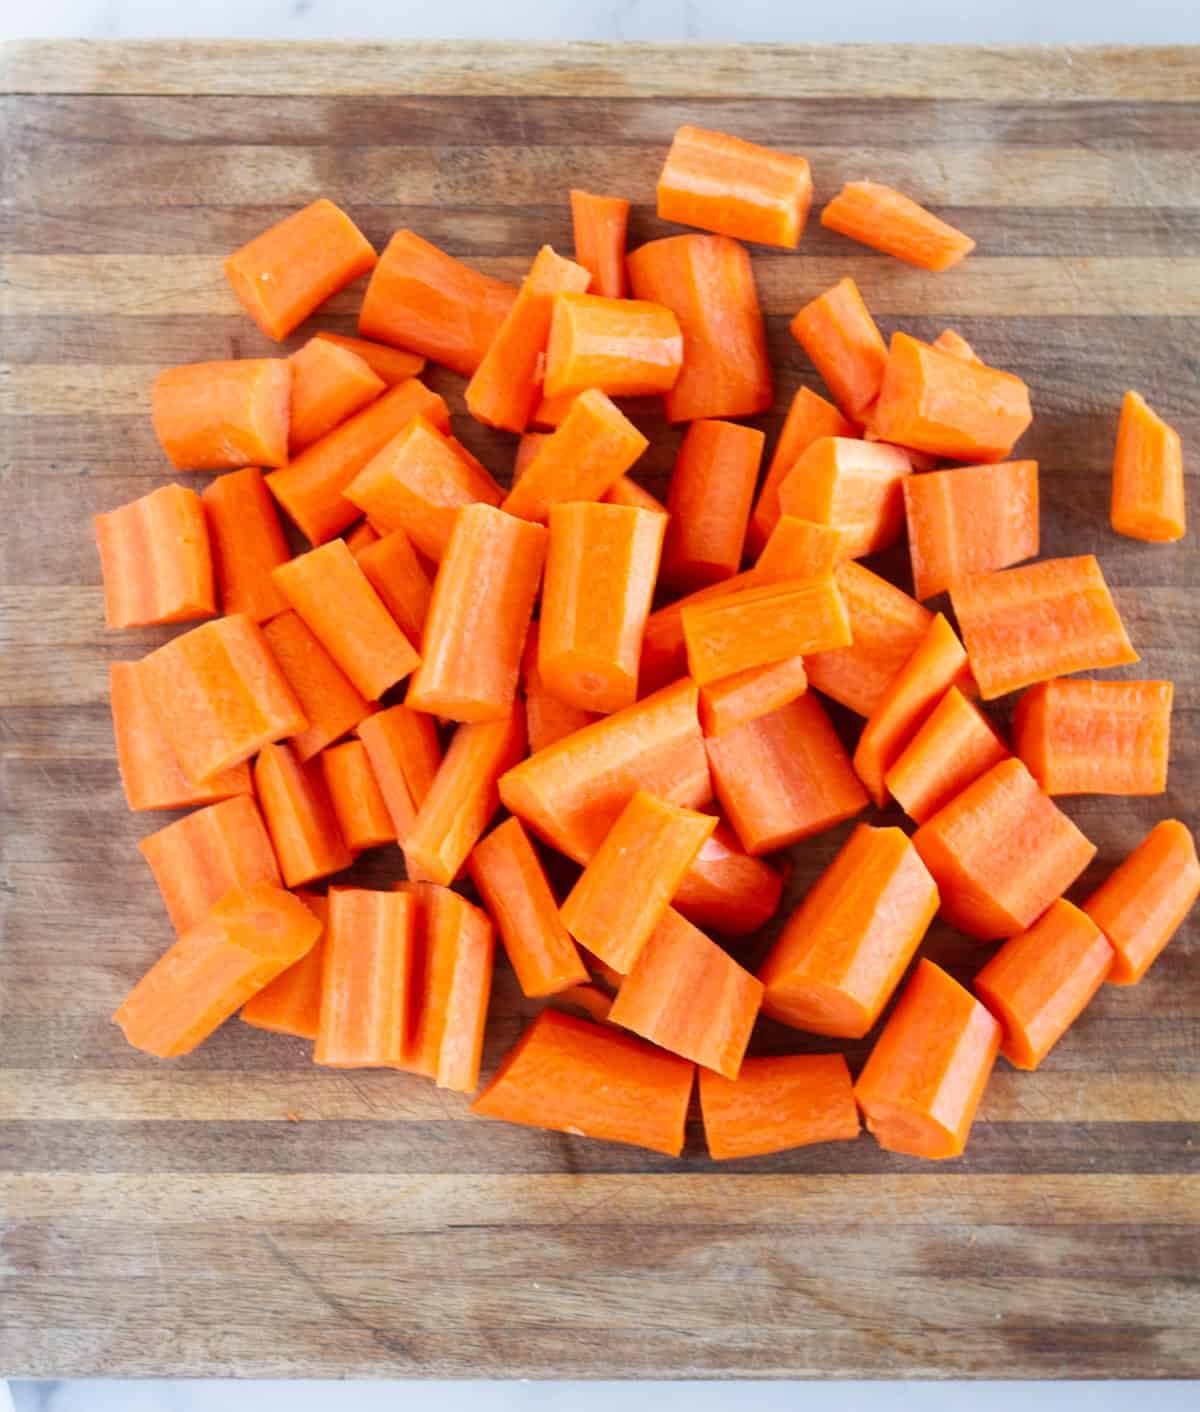 chopped carrots on cutting board.